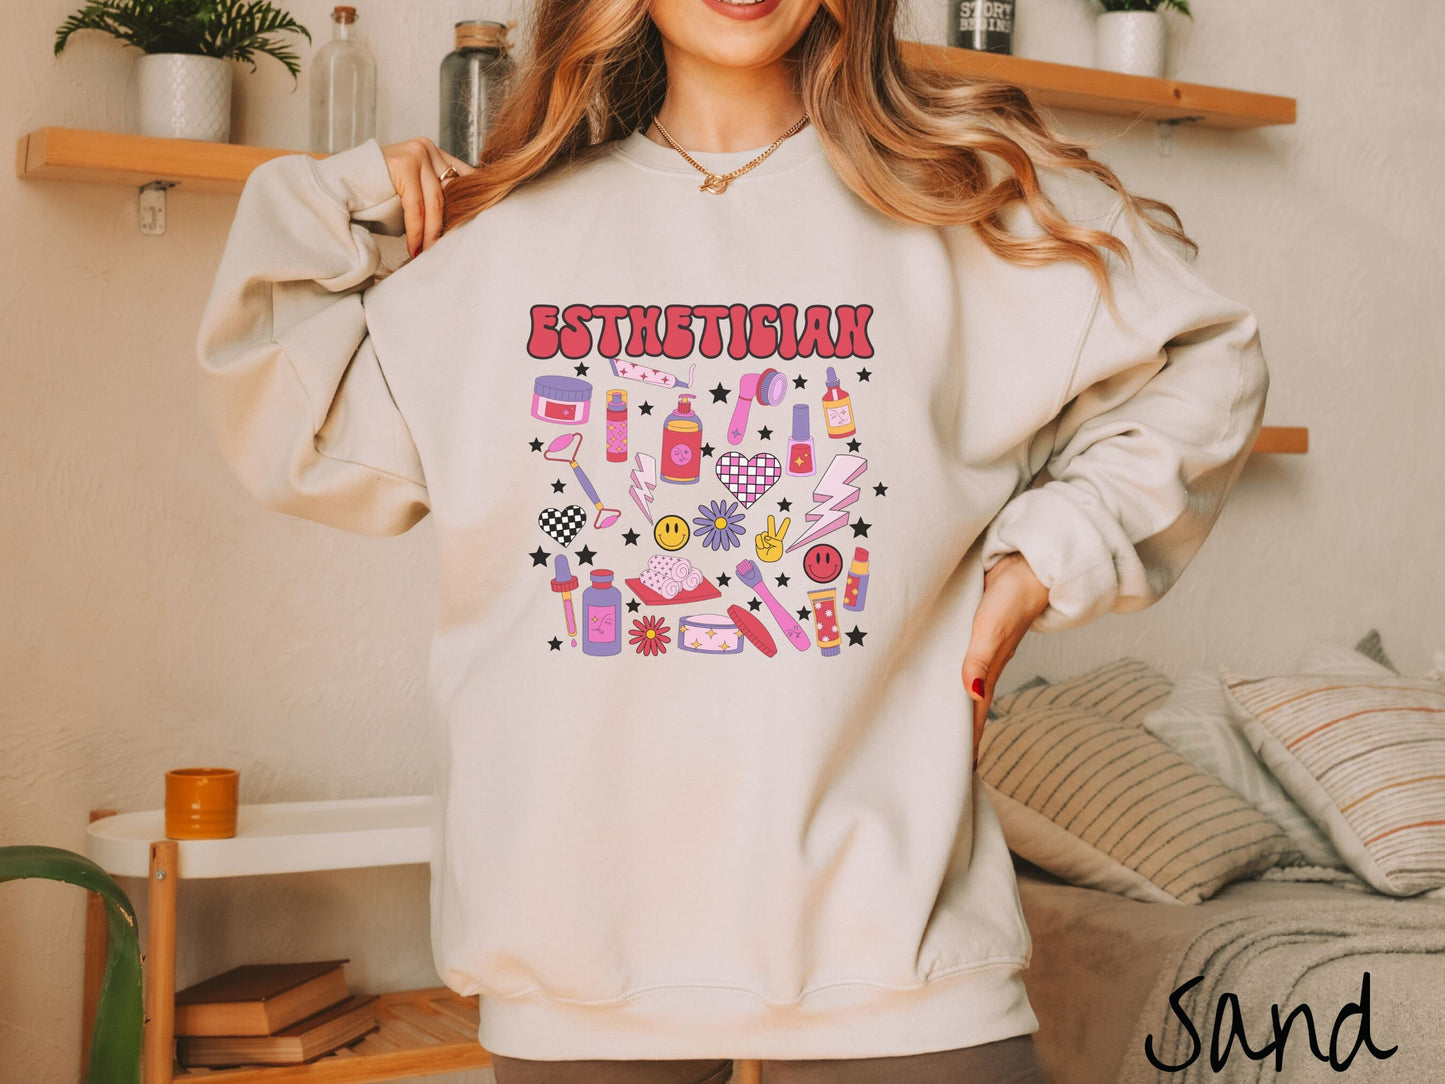 A woman wearing a cute sand colored sweatshirt with the word Esthetician across the top and hair care items below like cream, rollers, hair care products, and droppers. Smiley faces, stars, and lightning bolts are spread out among the items.